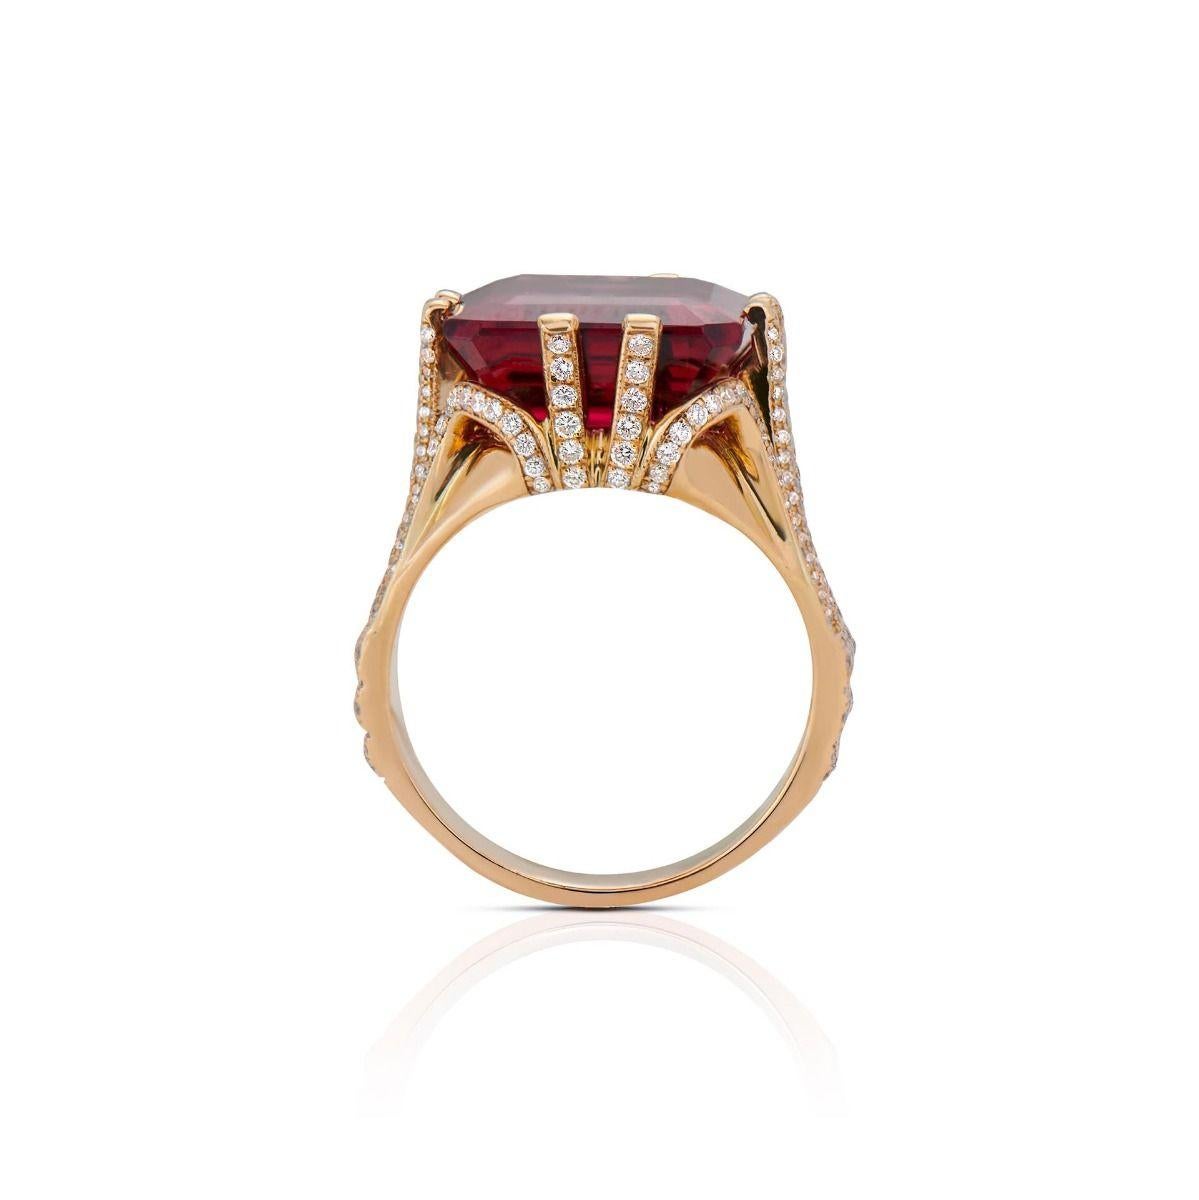 This architectural ring displays an emerald-cut crimson-colored rubellite, weighing 11.48 cts. Handmade in 18k yellow gold, it is set with 345 round-cut diamonds that weigh 1.23 cts. This structural setting raises its centerpiece gemstone in an